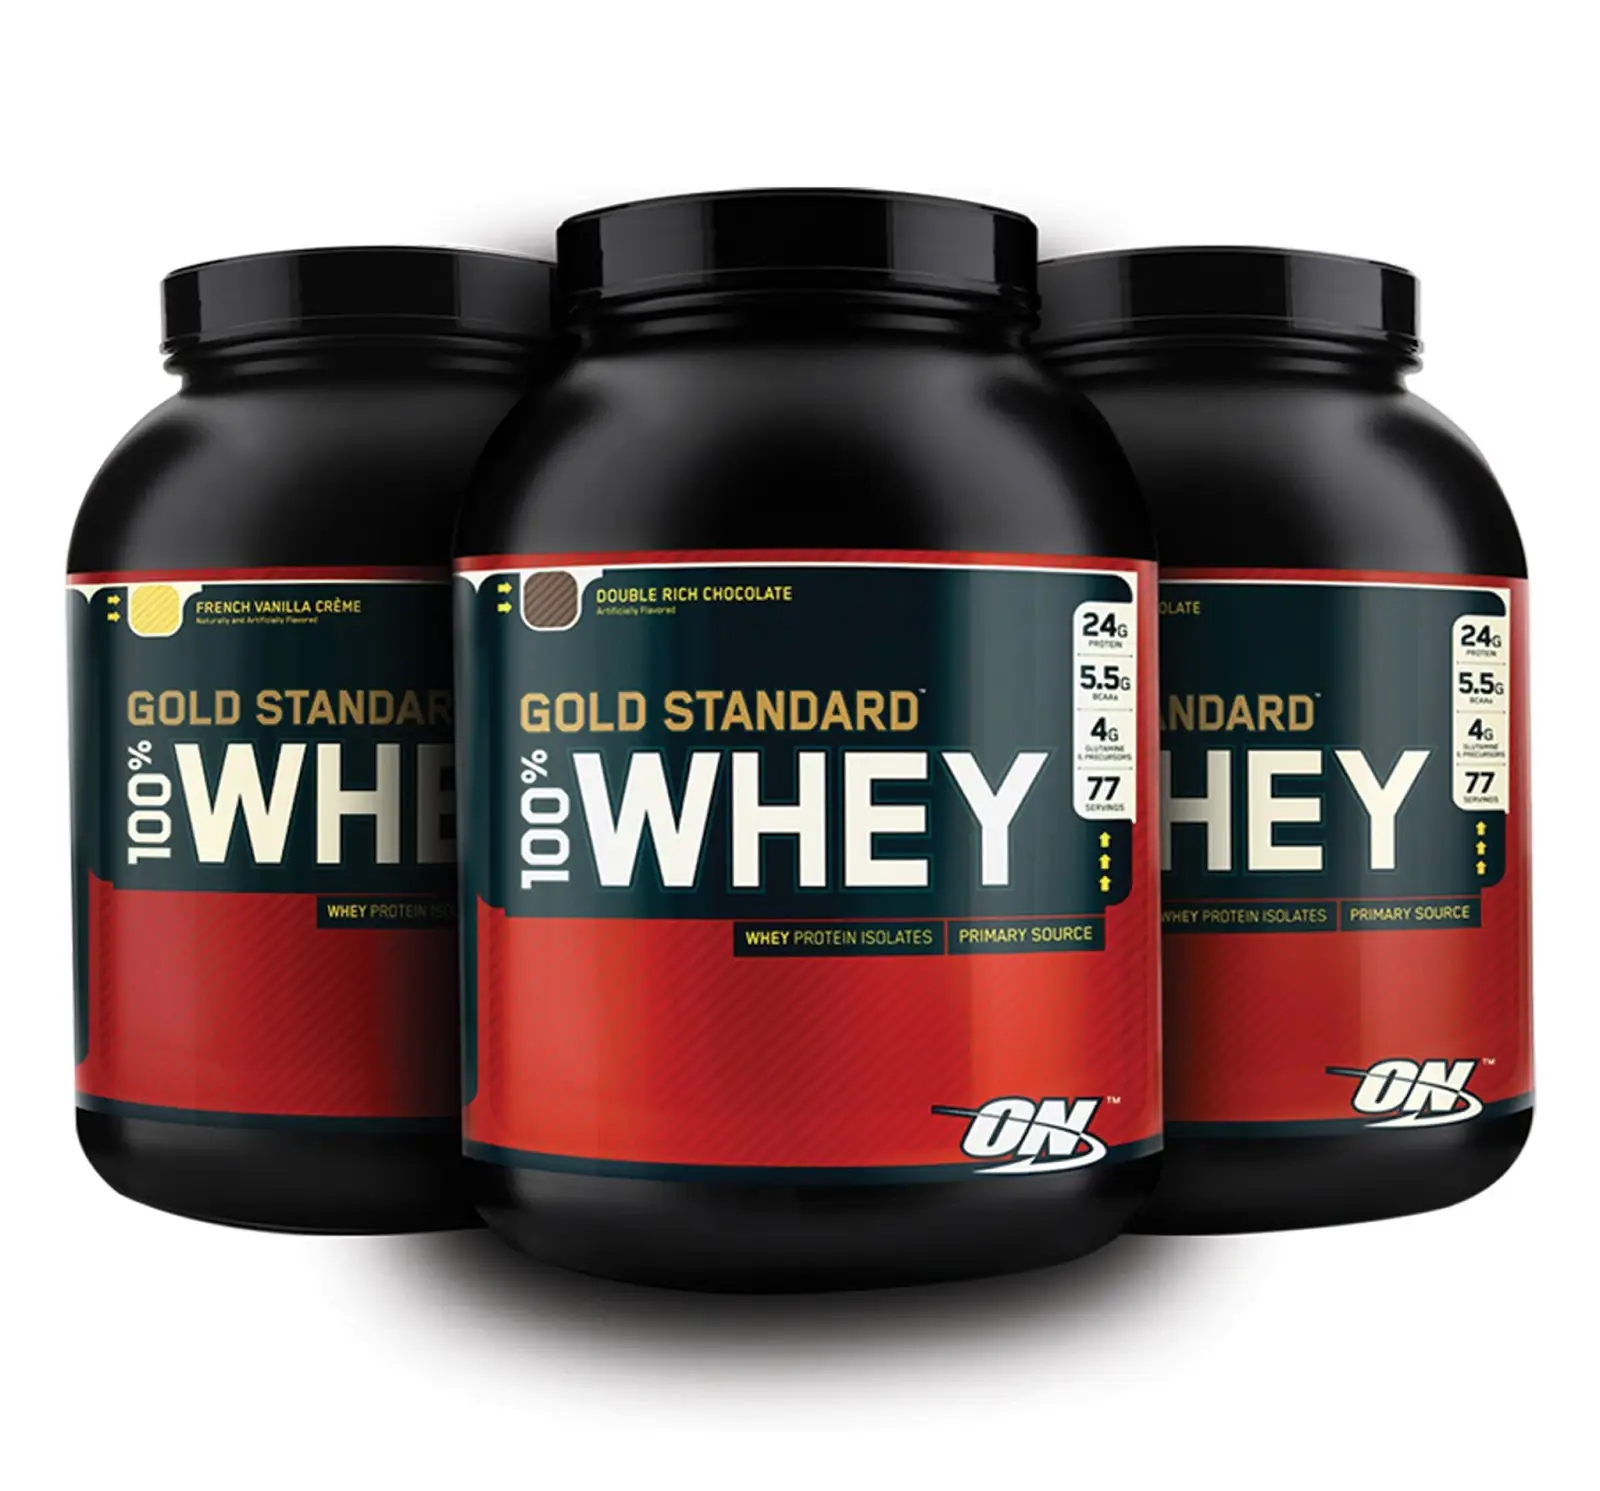 What is Whey Protein?